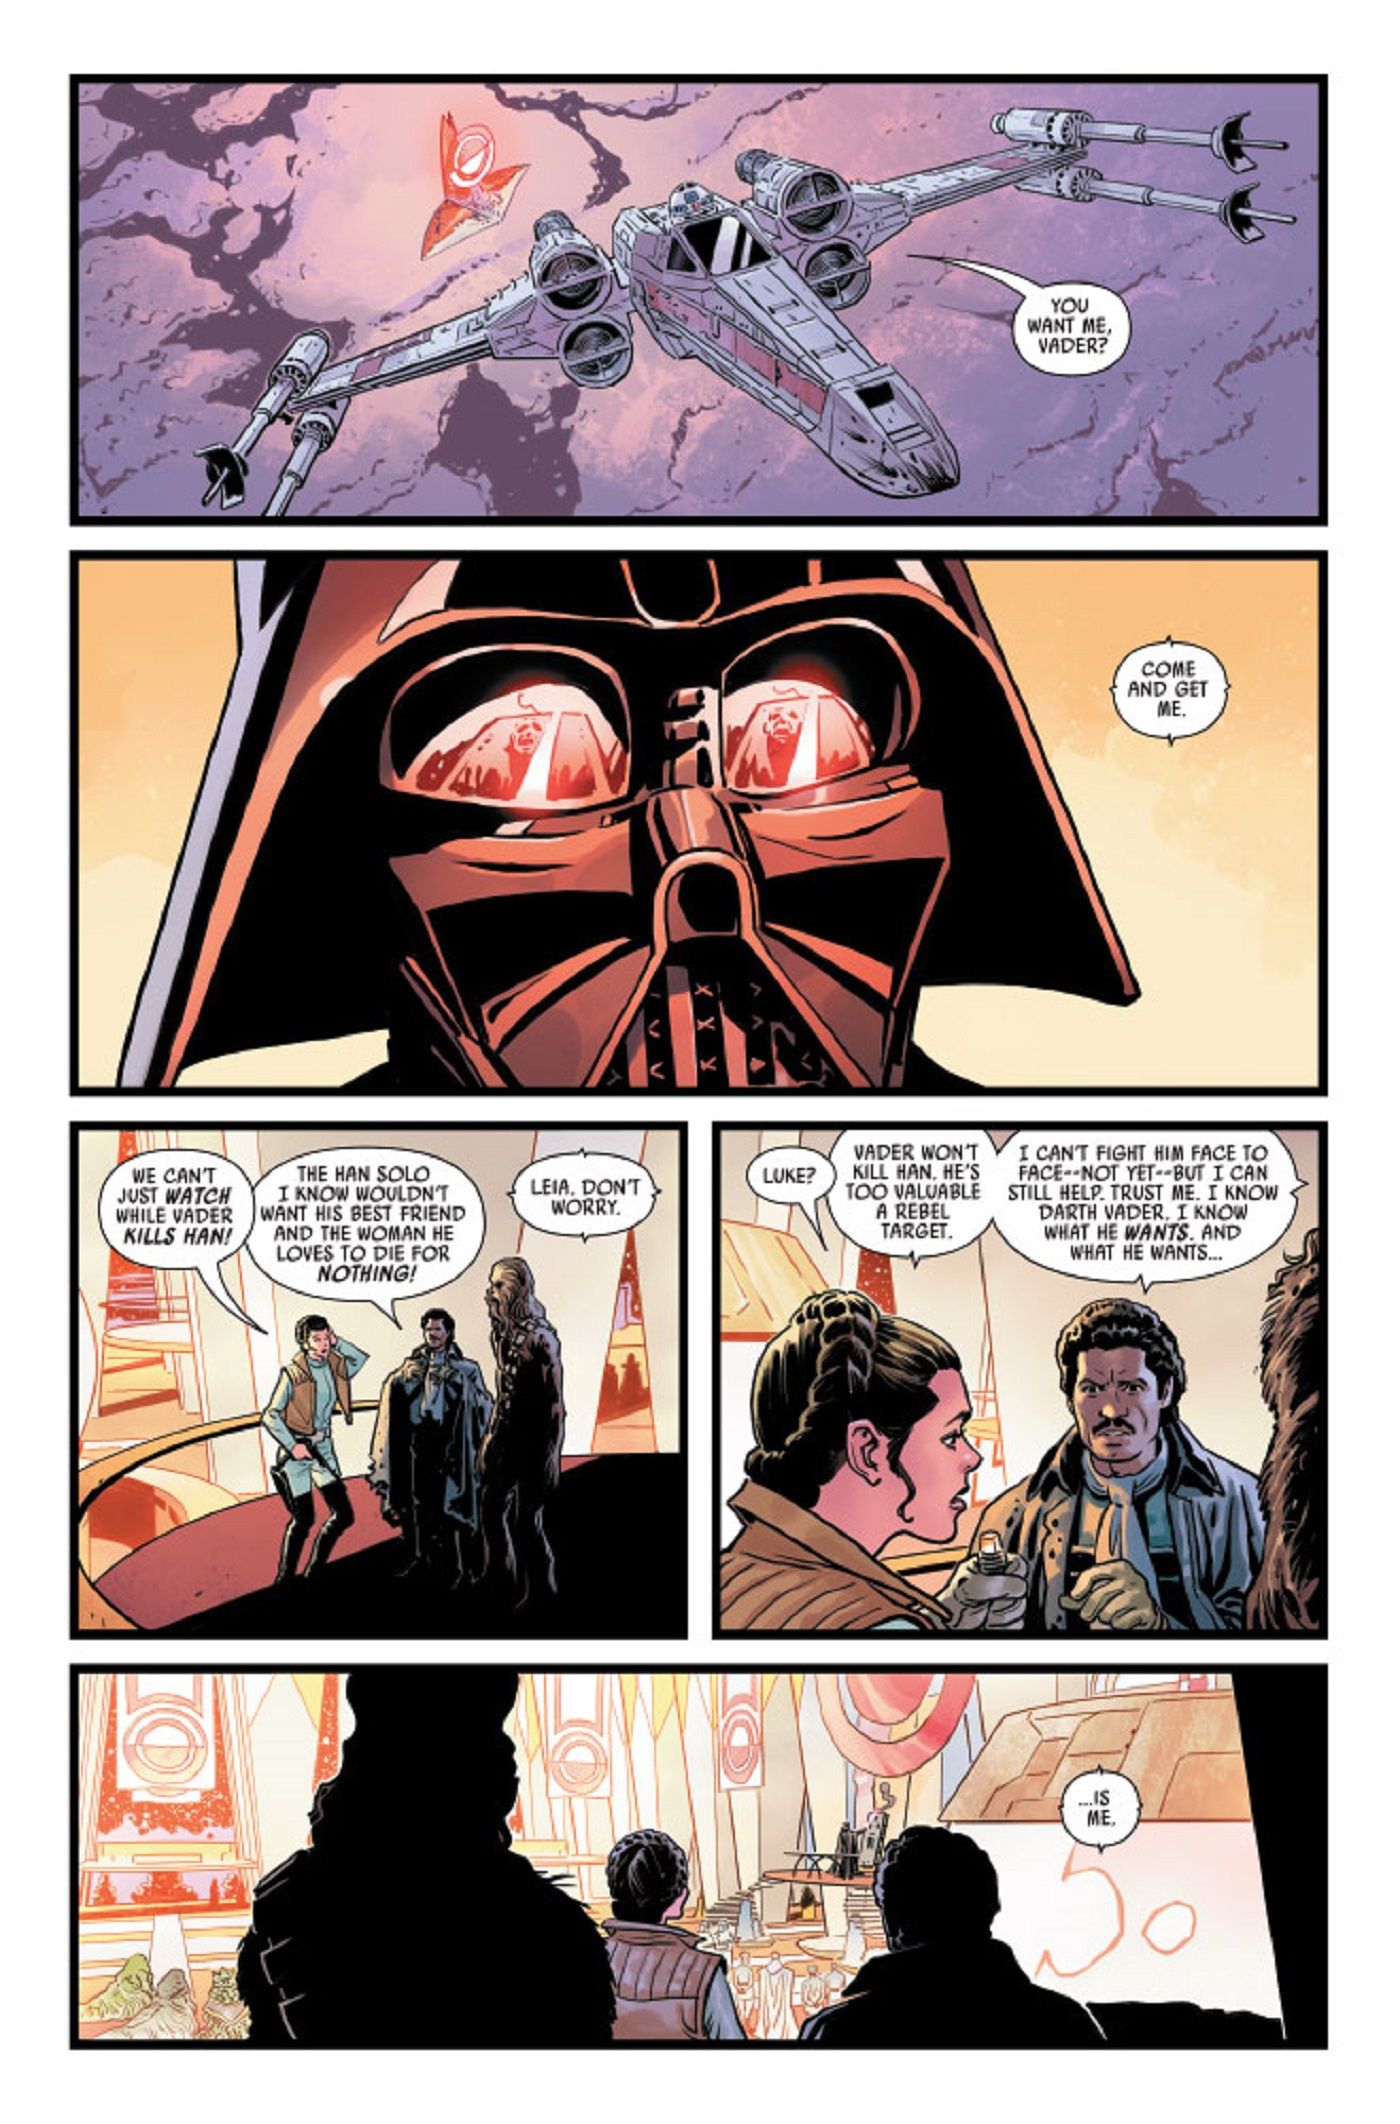 Star Wars War of the Bounty Hunters #4 Page 3